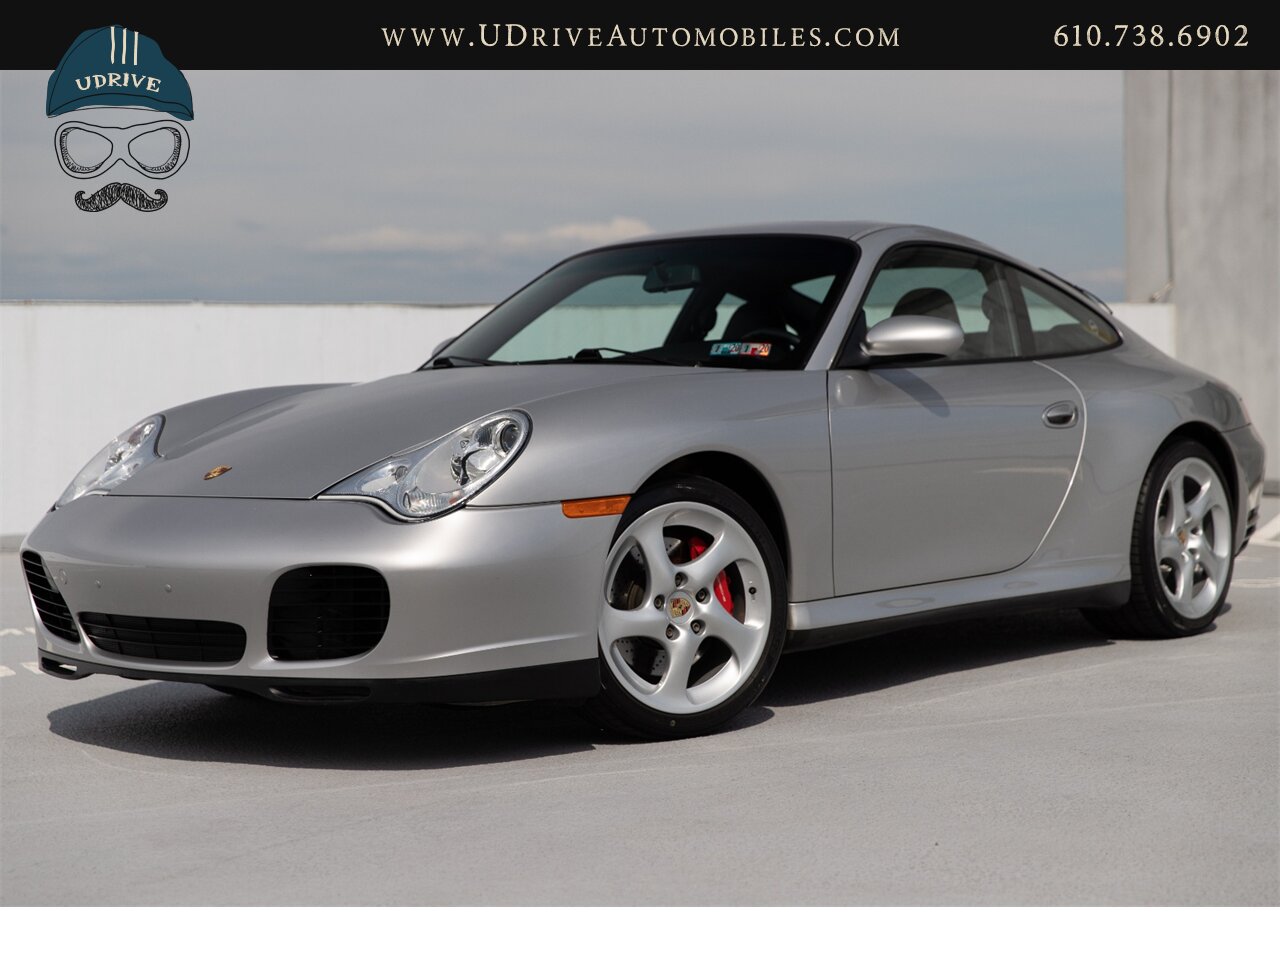 2003 Porsche 911 Carrera 4S C4S 6 Speed Manual Sport Seats  Leather Covered Hardback Seats - Photo 1 - West Chester, PA 19382